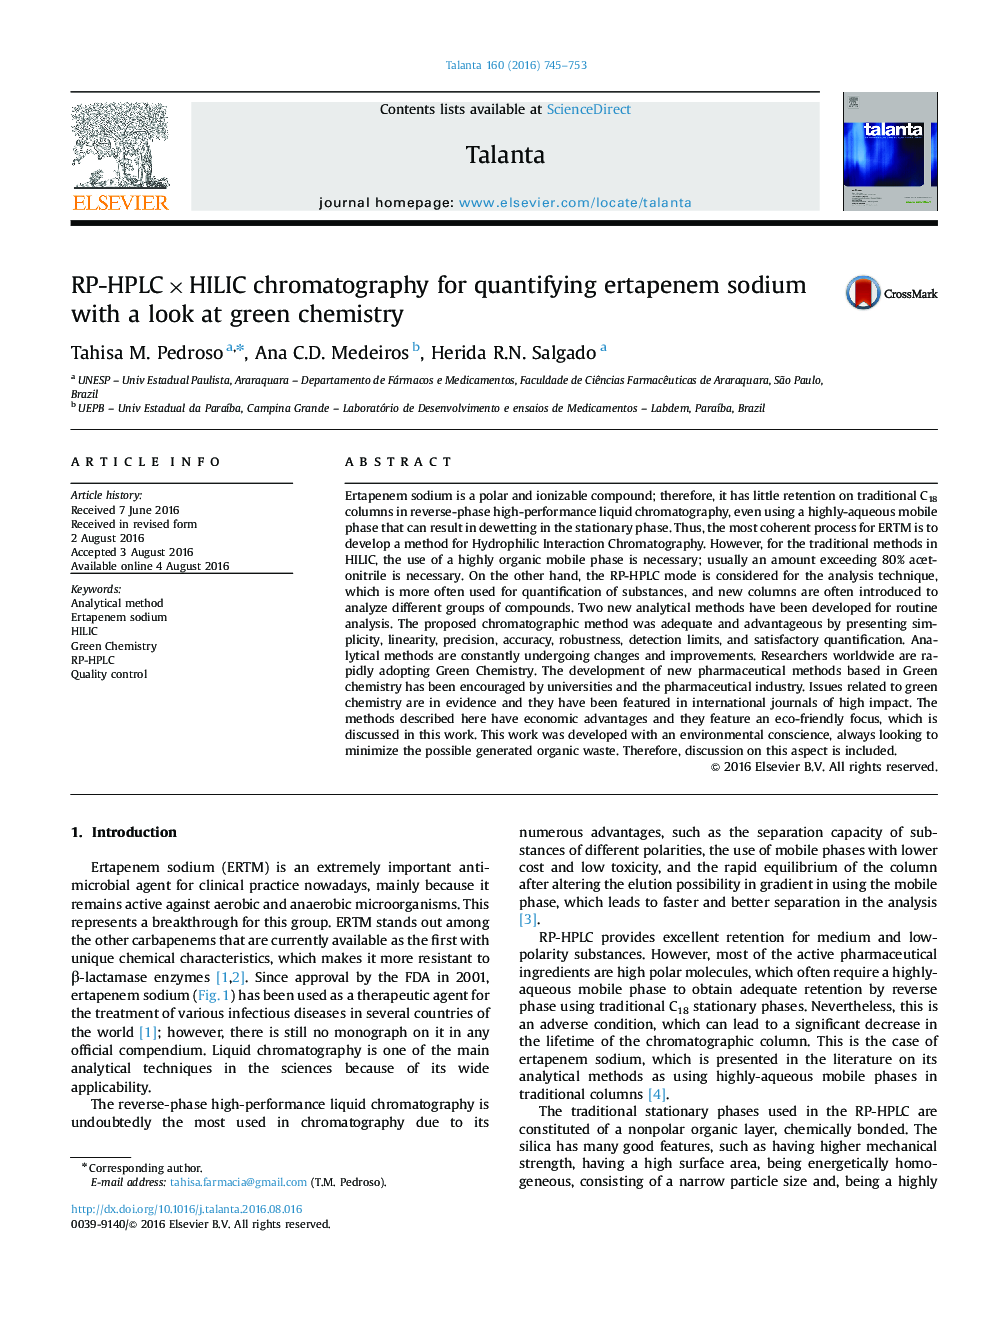 RP-HPLC×HILIC chromatography for quantifying ertapenem sodium with a look at green chemistry